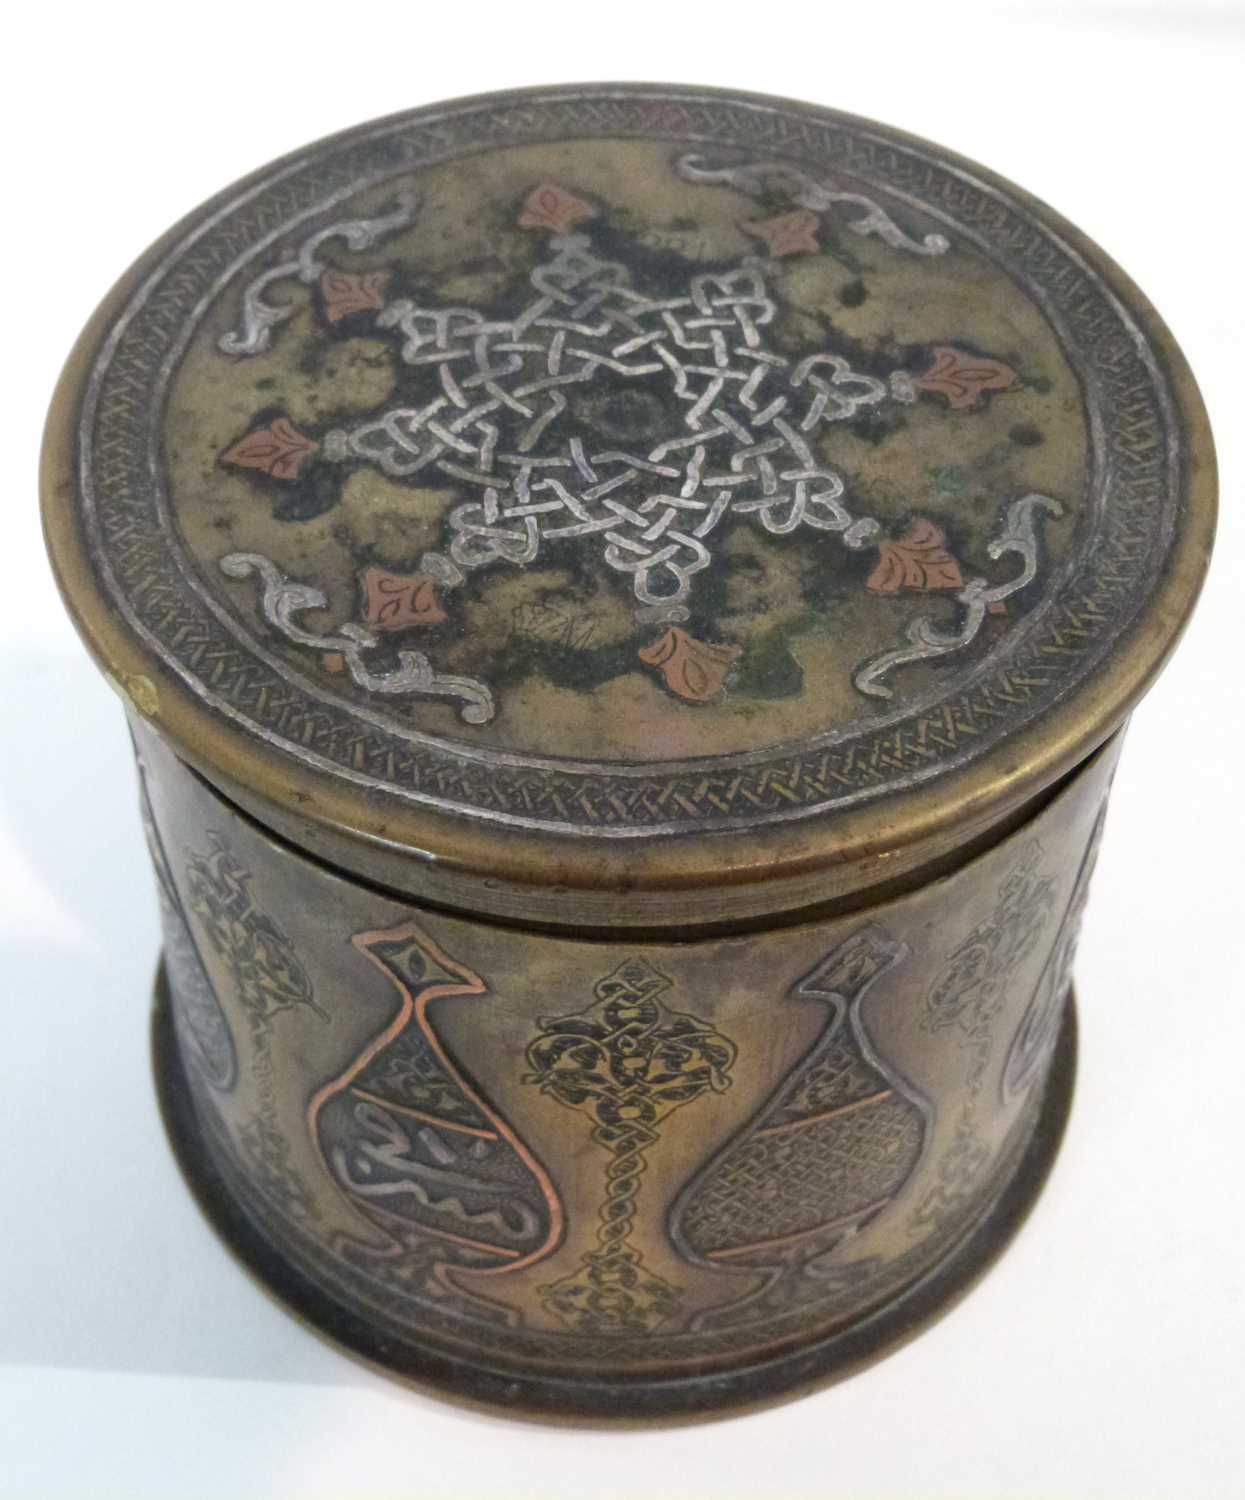 Trench Art - A German shell case and cover dated 1915 decorated with Islamic vases and script, - Image 3 of 6